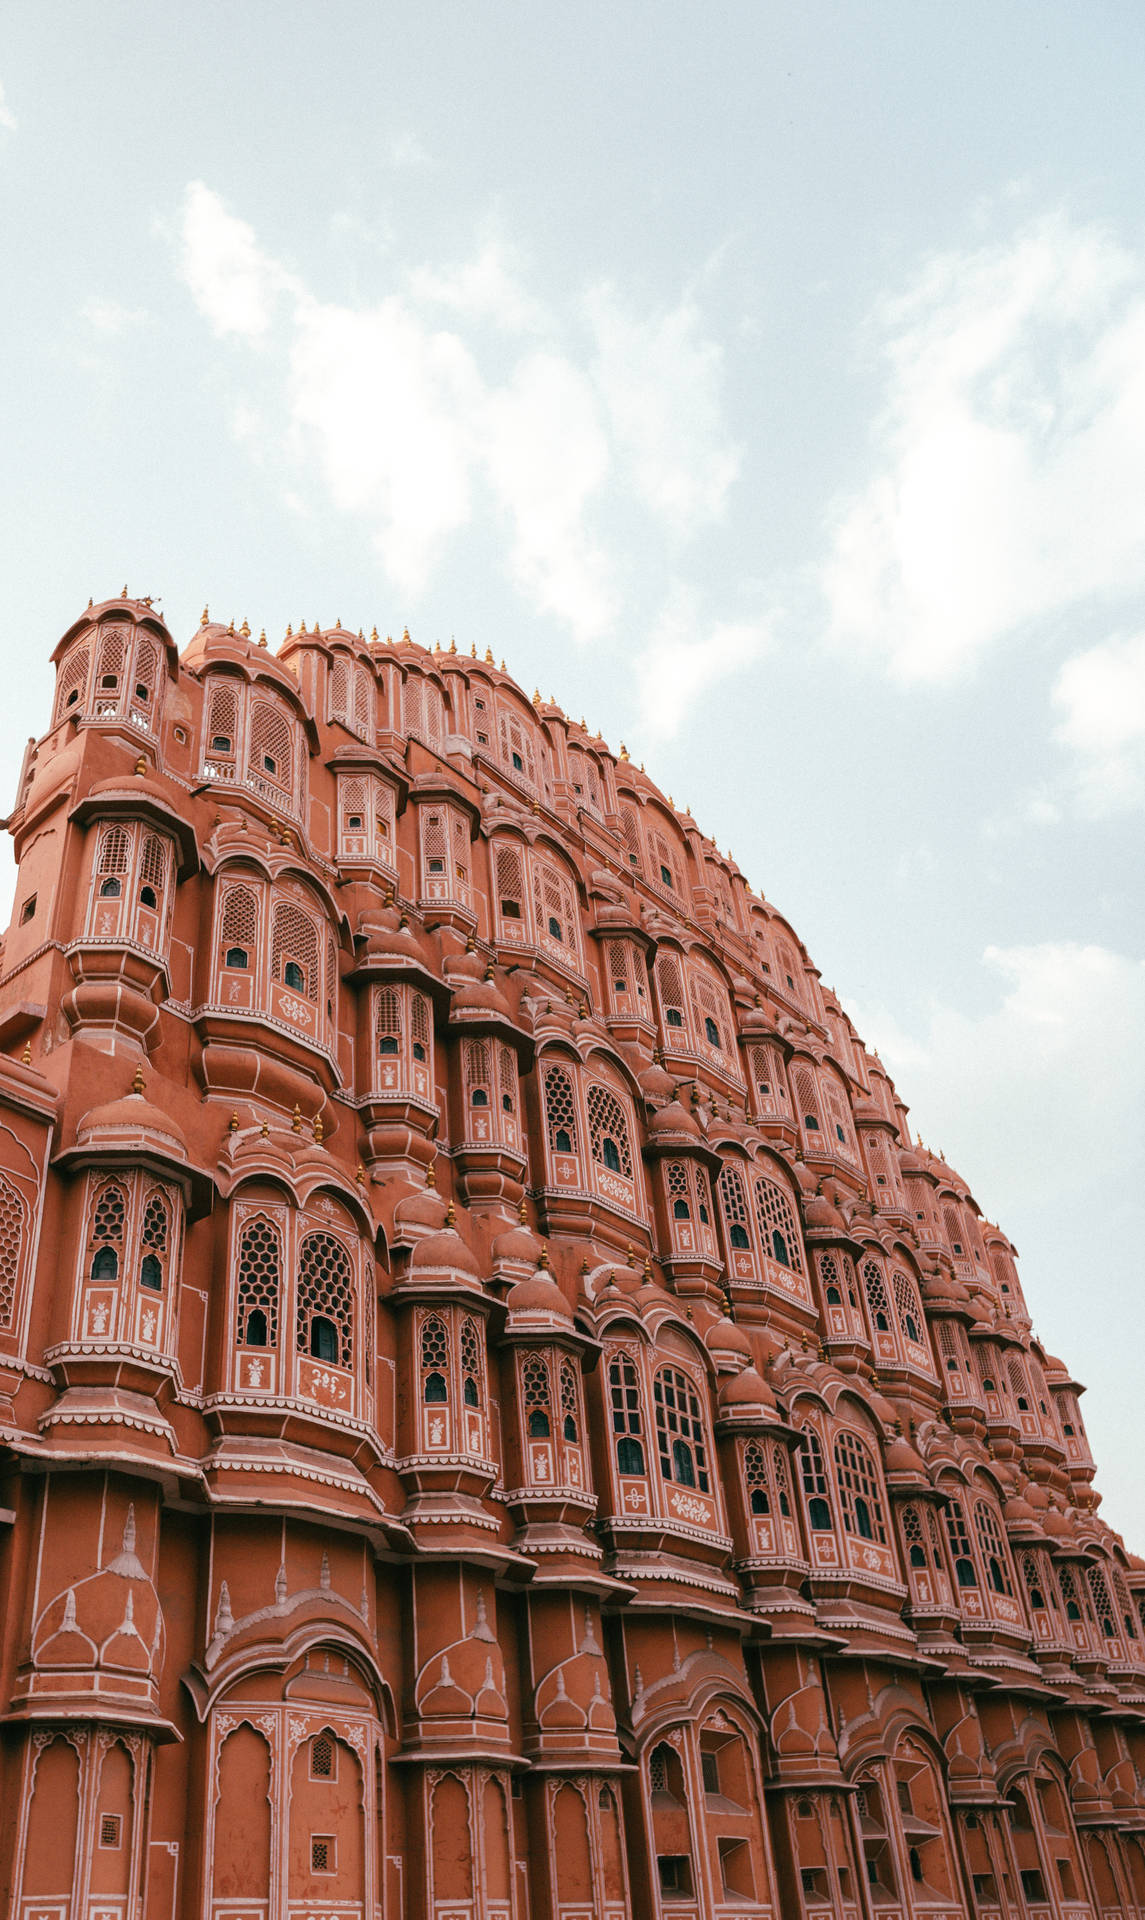 (hawa Mahal Is A Famous Landmark In Jaipur, India. The Sentence Is Suggesting Using A Picture Of The Facade As A Wallpaper For Computer Or Mobile.) Wallpaper